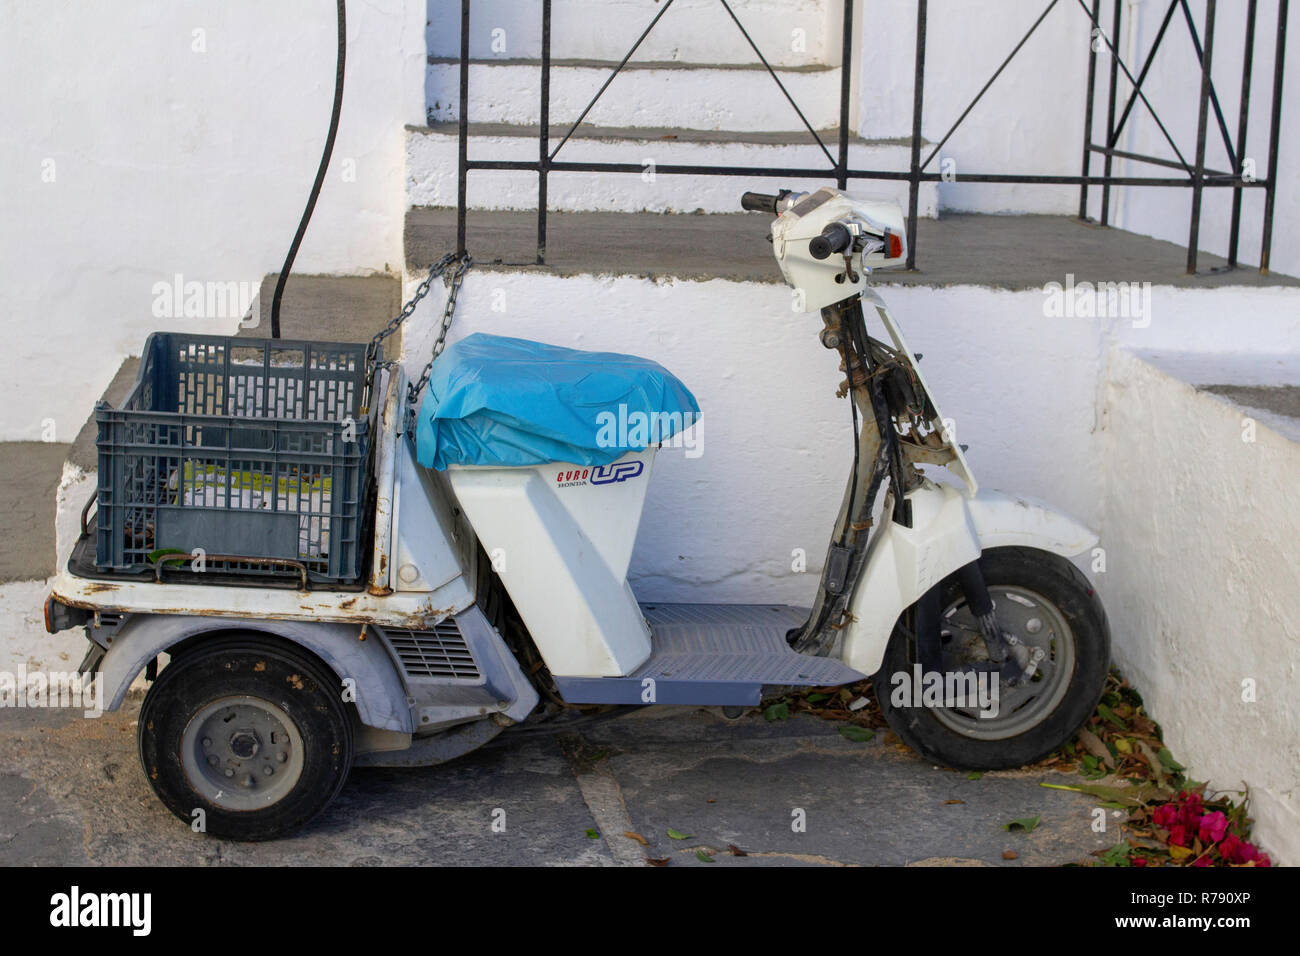 A small Honda GYRO used here as a delivery vehicle to navigate the narrow streets of lindos, Rhodes,Greece. Stock Photo